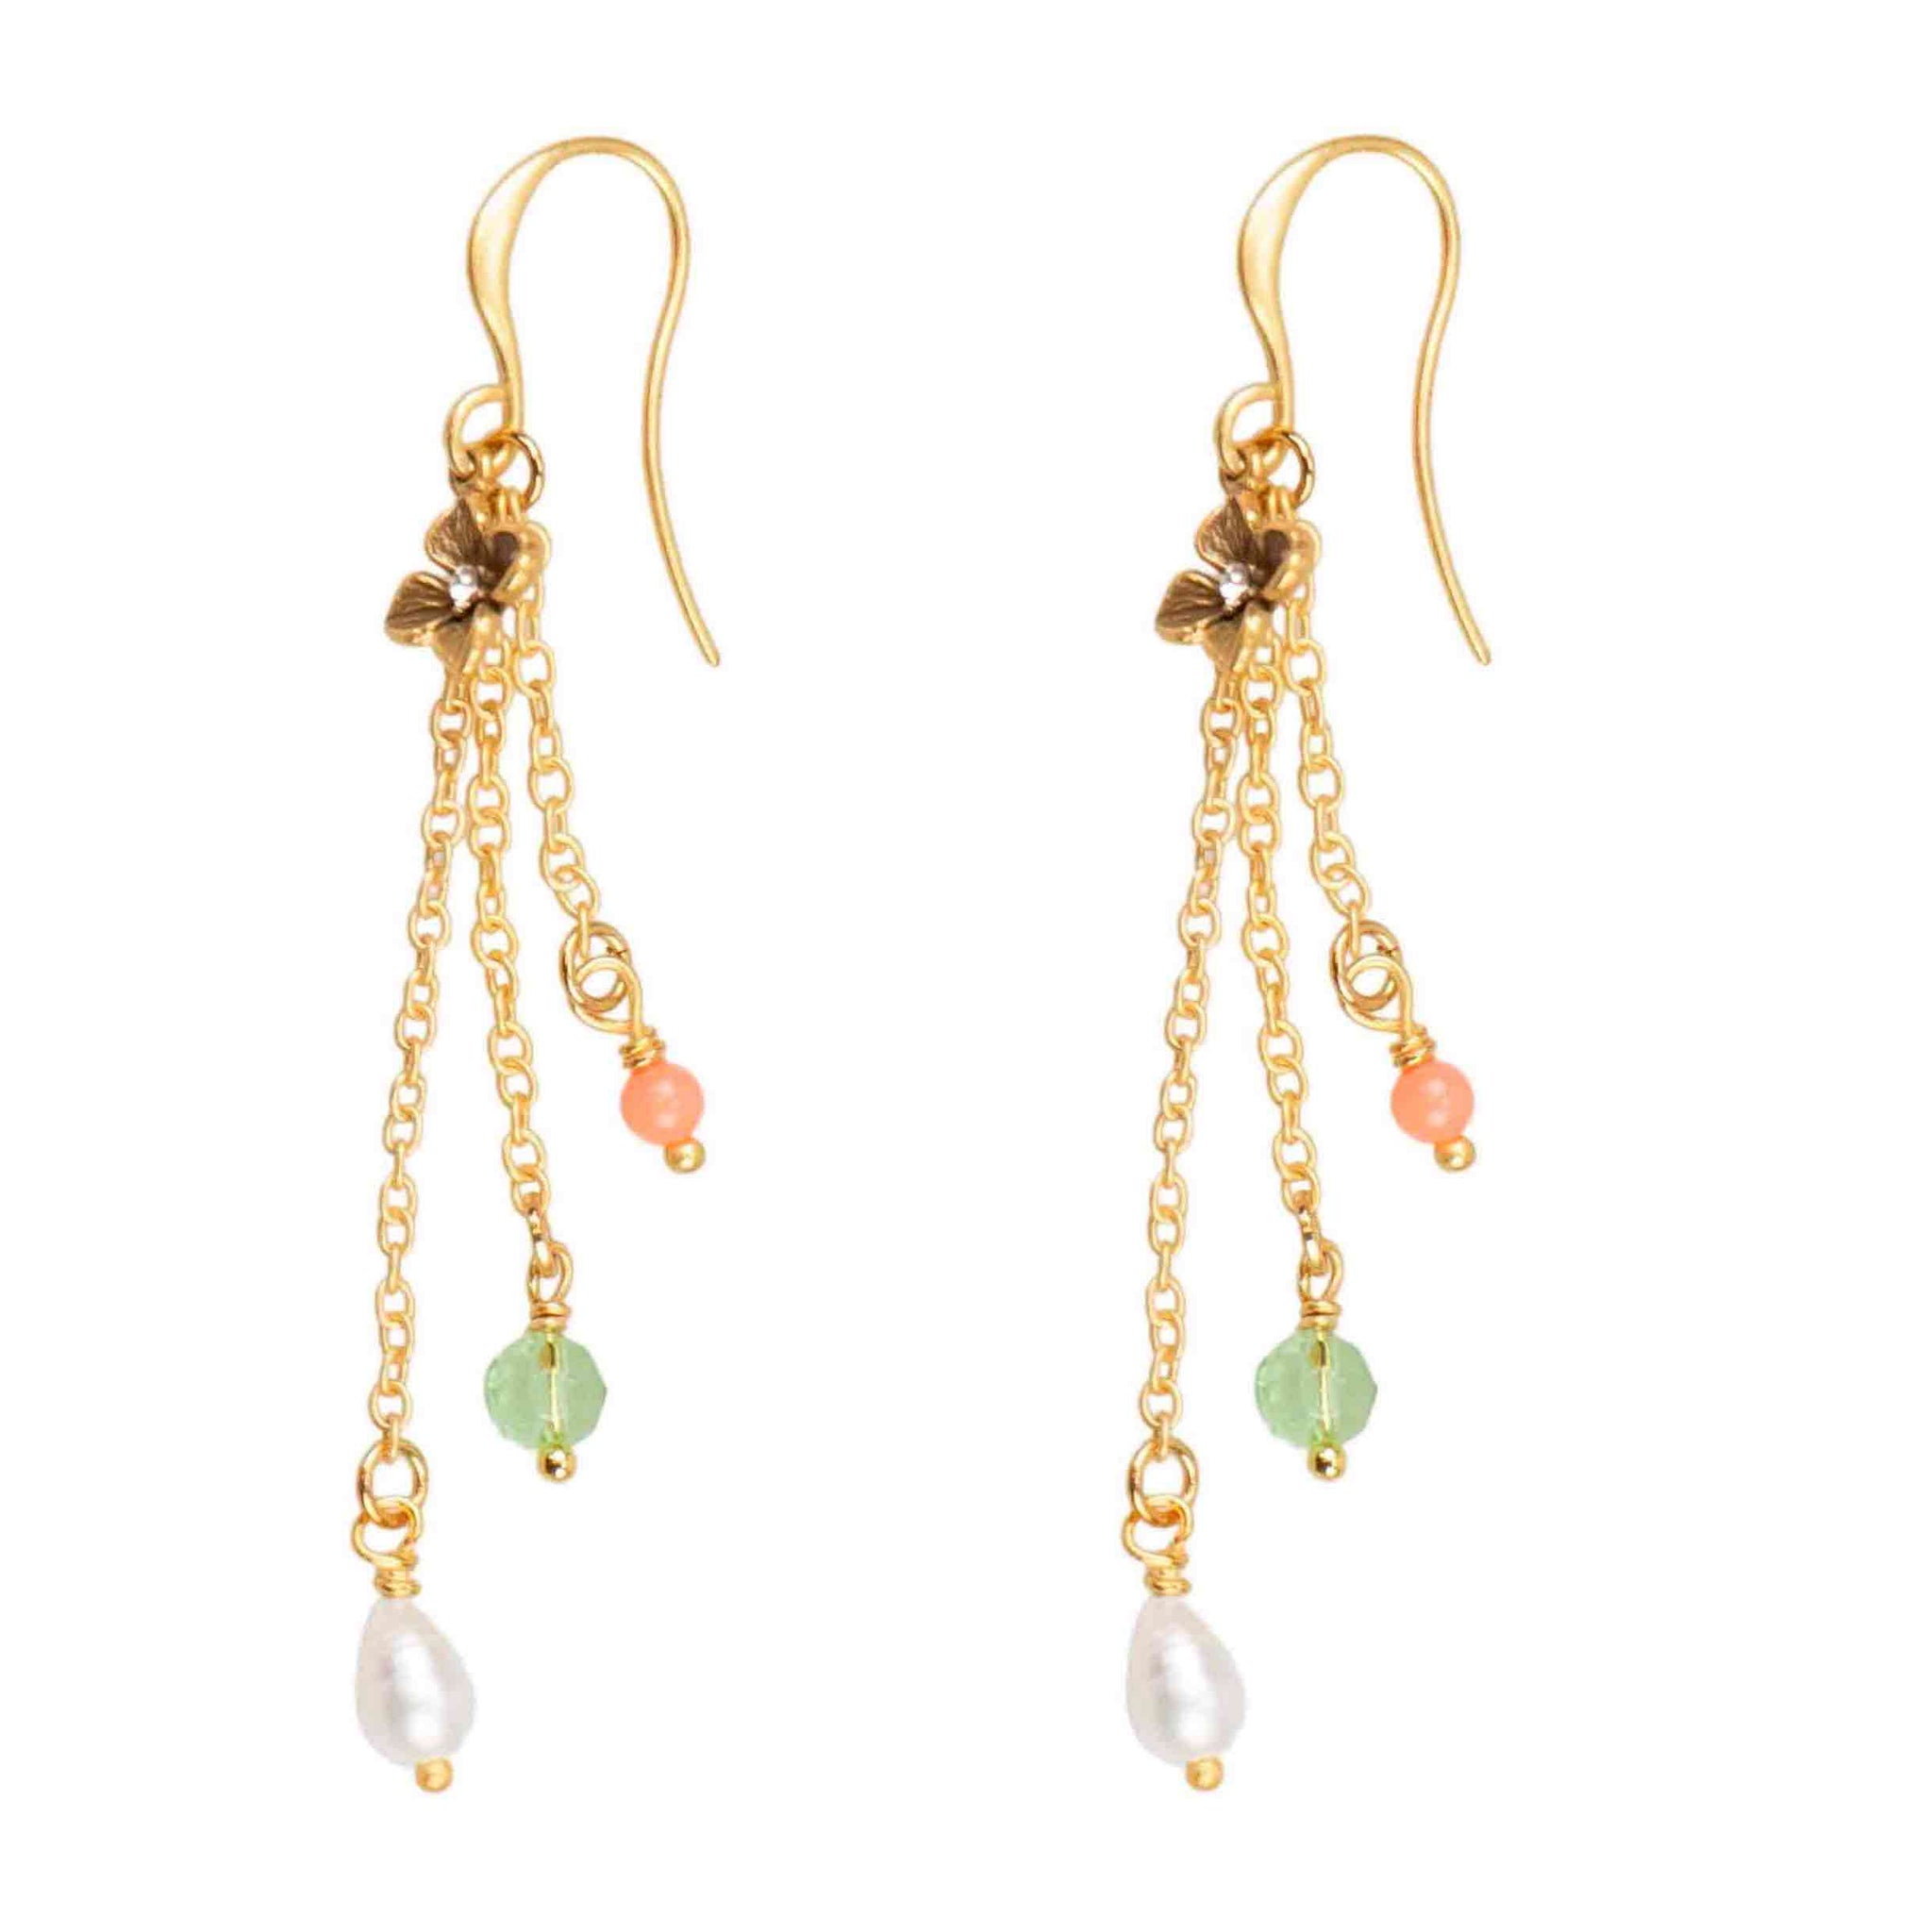 Hultquist 3 chain drop earring